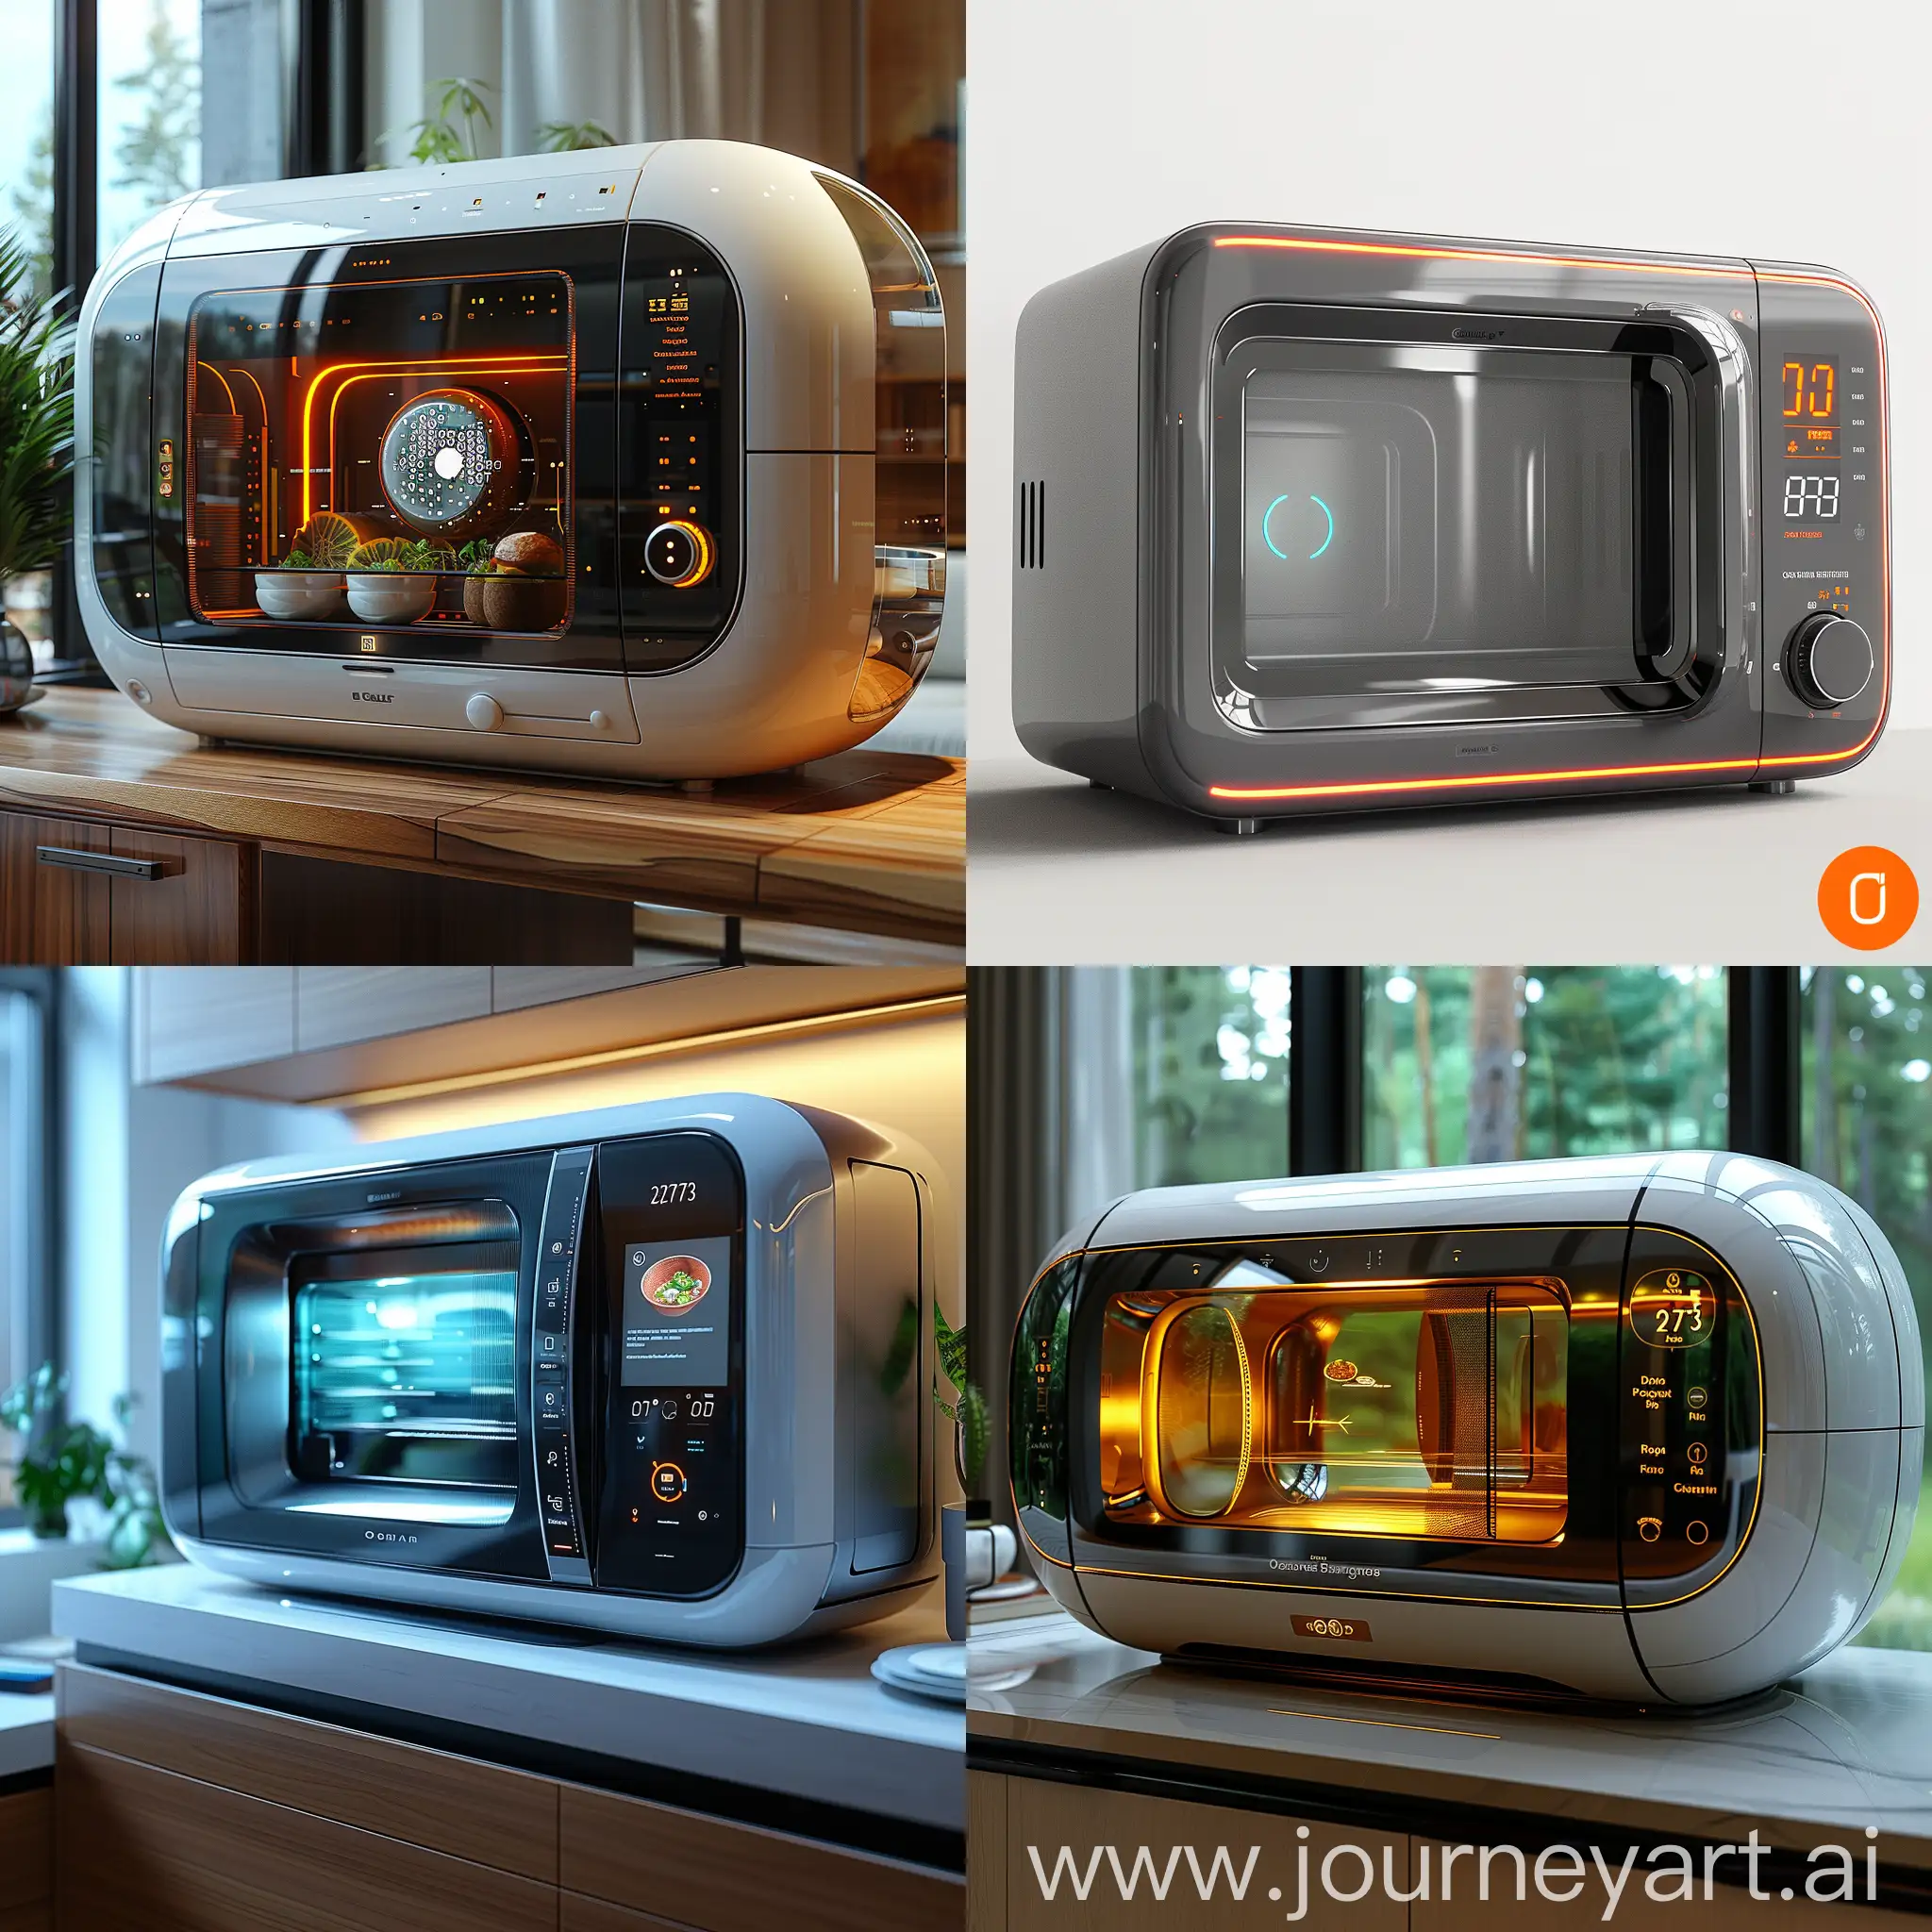 Futuristic-Microwave-2473-Sleek-Design-with-AI-Chef-and-Molecular-Reconstruction